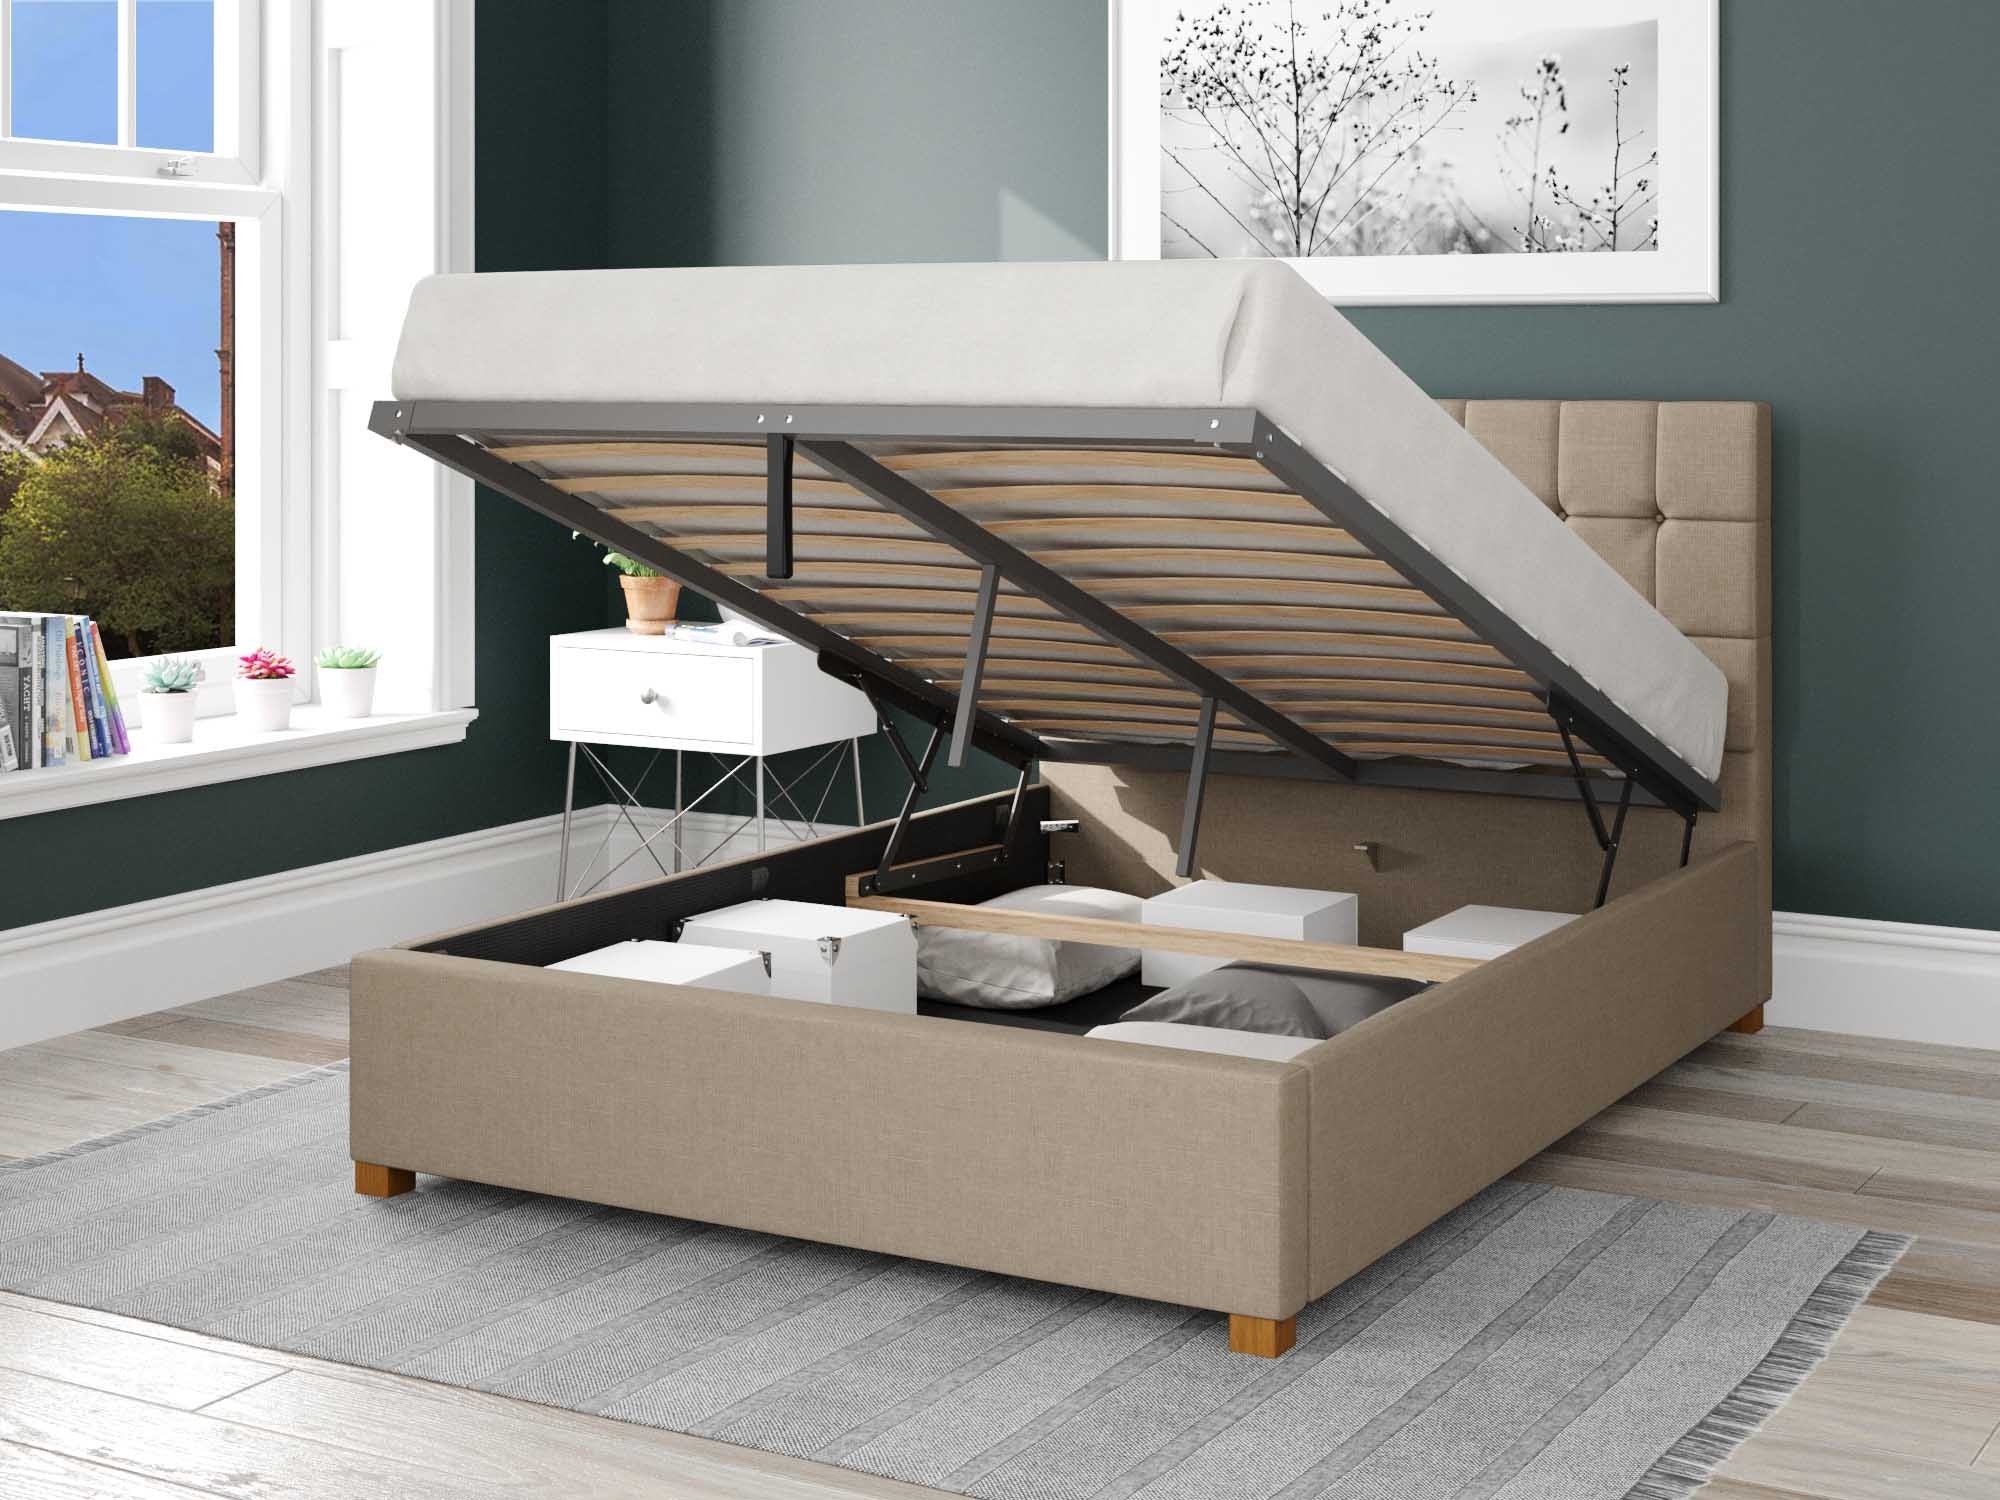 Sinatra Fabric Ottoman Bed - Eire Linen - Natural